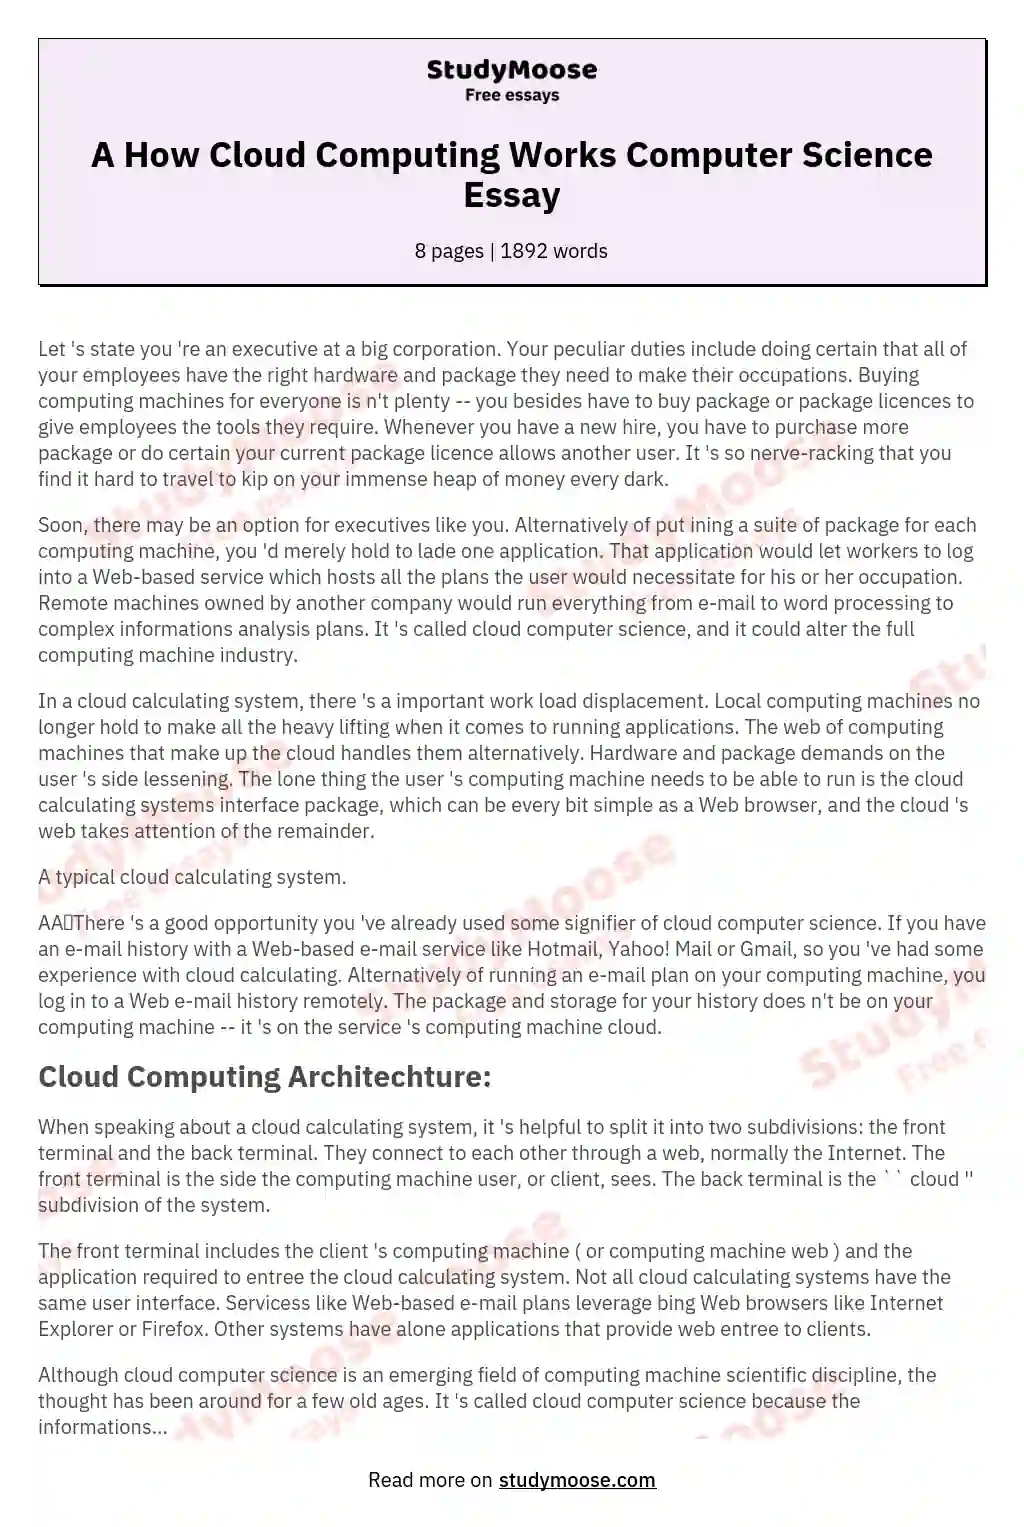 A How Cloud Computing Works Computer Science Essay essay